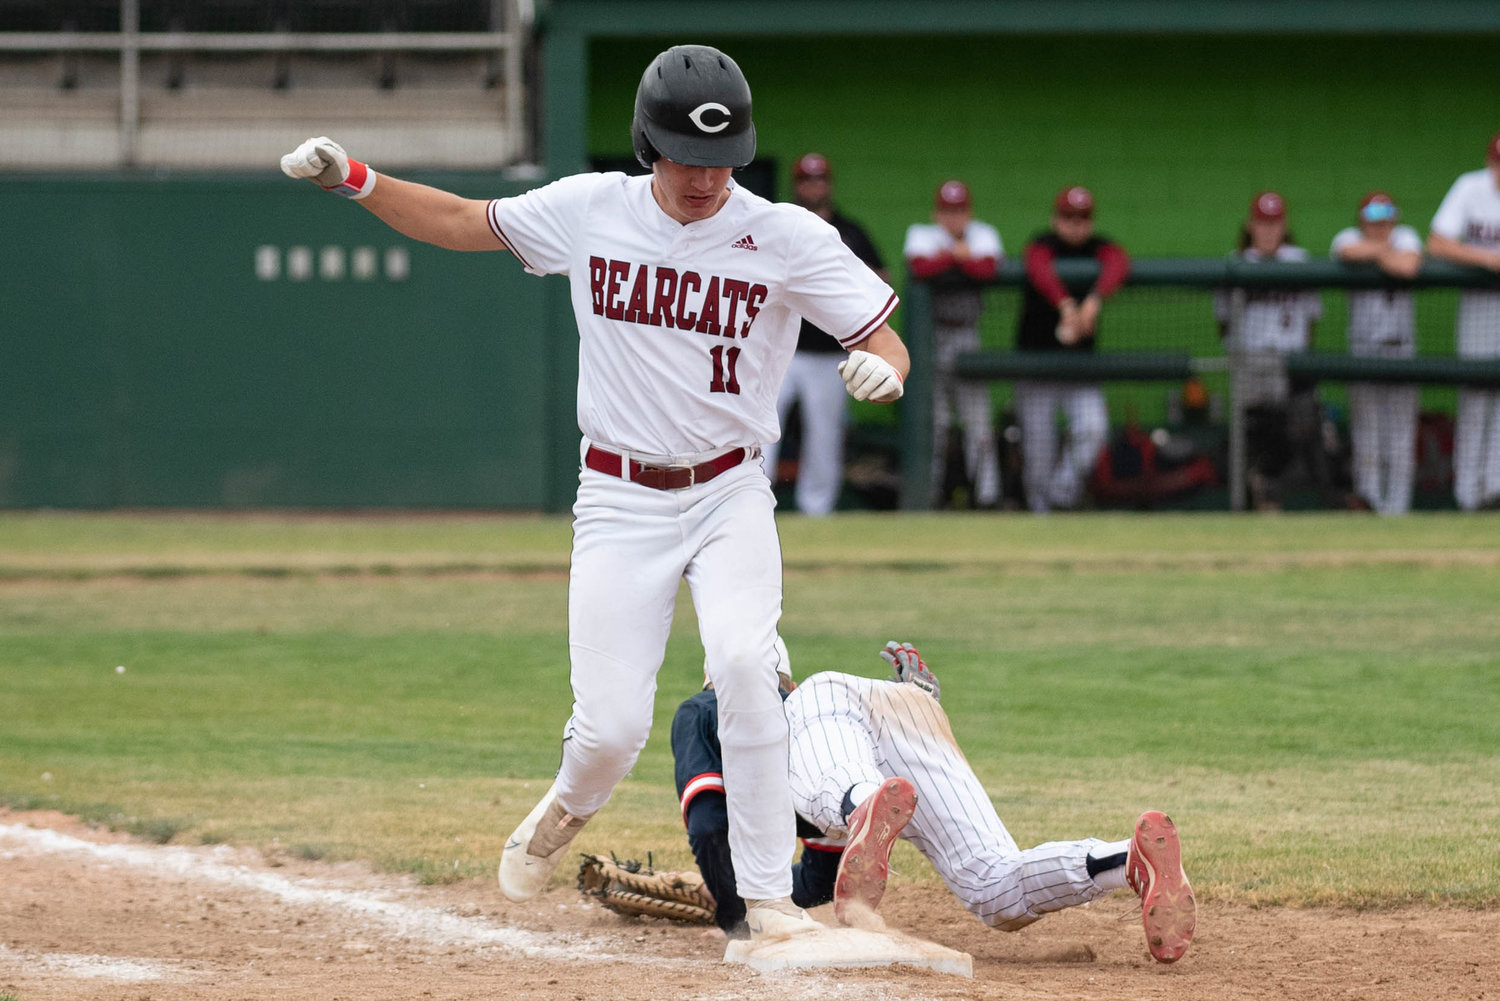 W.F. West's Riggs Westlund is ruled out at first after Ellensburg's first baseman makes keeps his foot on the bag for an out in the 2A State Baseball Third-Place Game at Yakima County Stadium May 28.